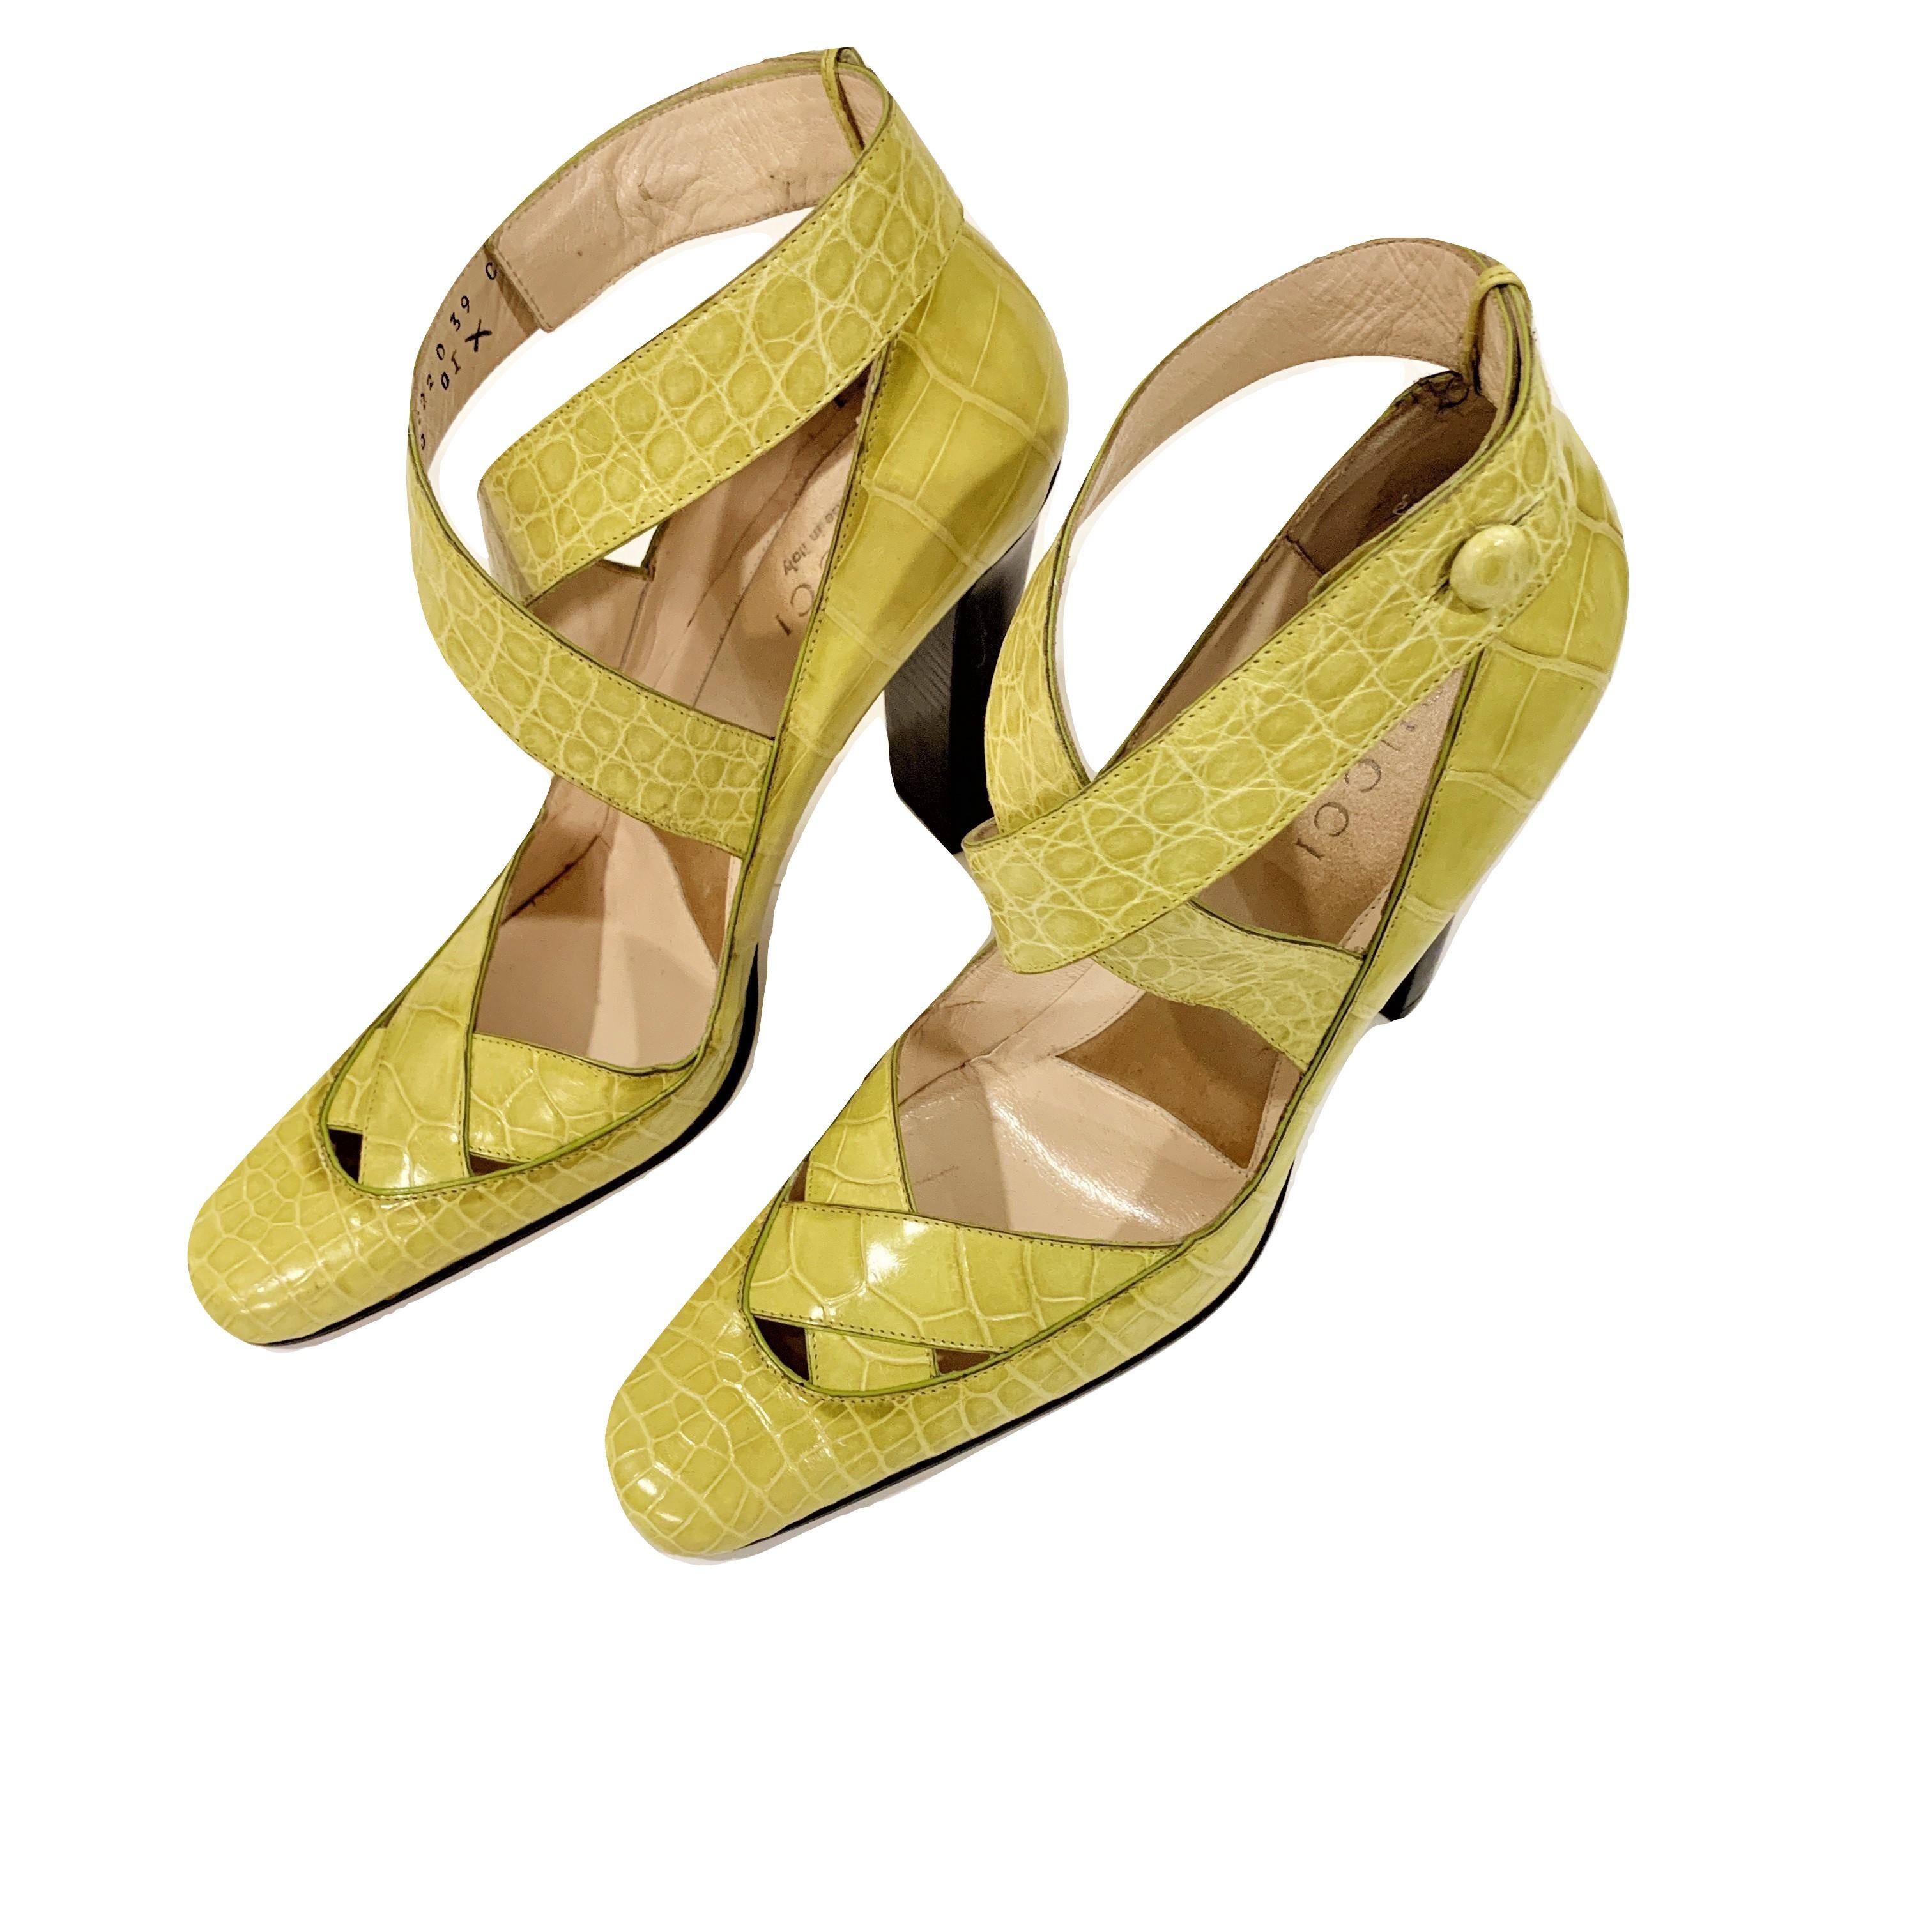 New Tom Ford for Gucci Crocodile Ballerina Heels Pumps in Light Chartreuse Sz 39 5